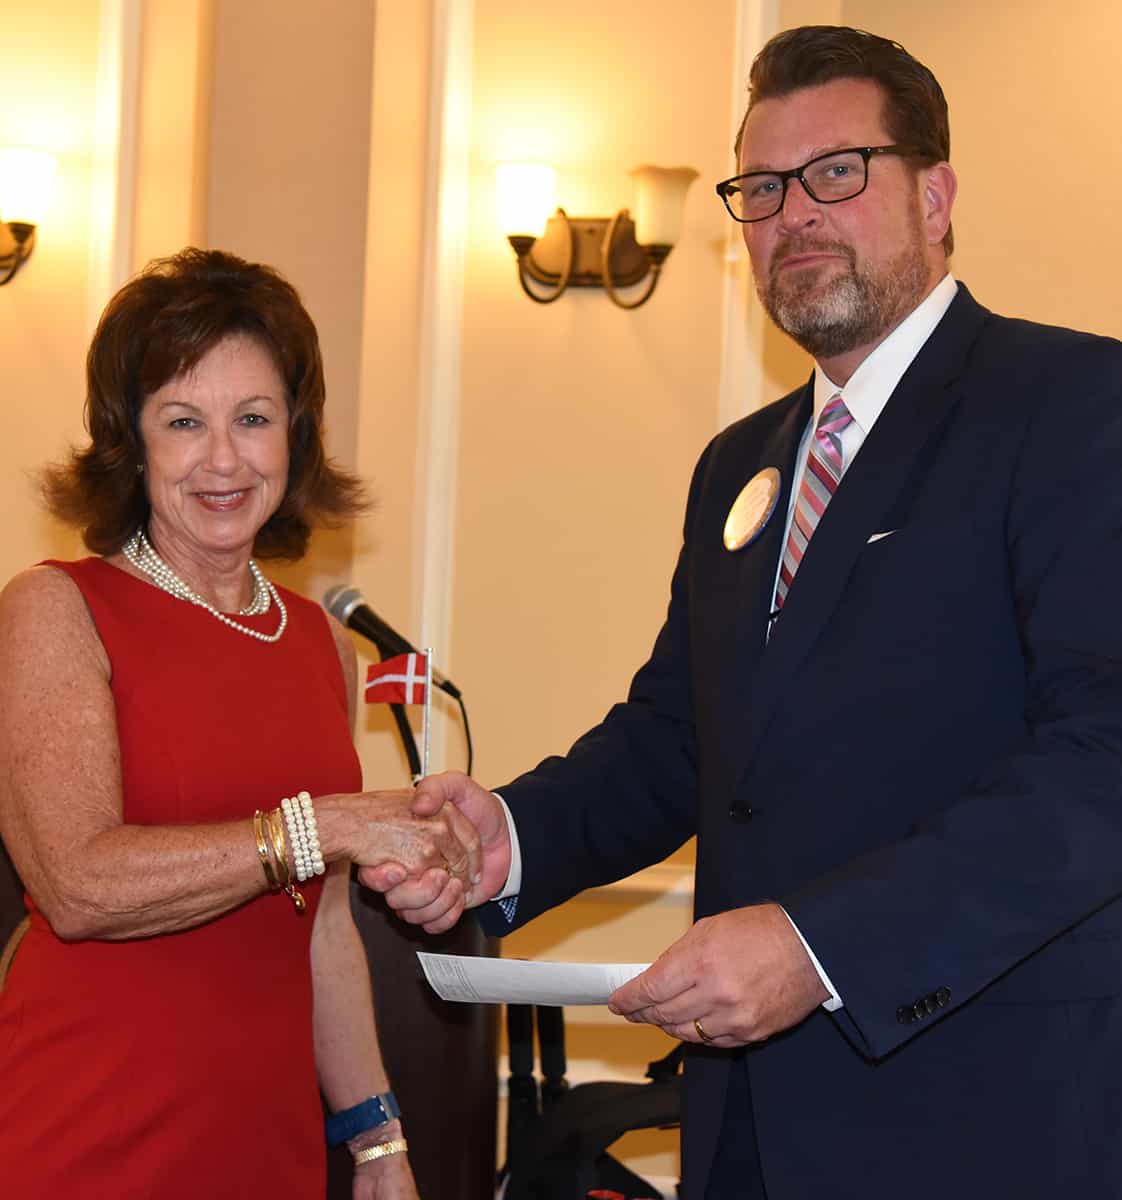 South Georgia Technical College President Dr. John Watford (r) is shown above accepting a donation from Rotary Club of Americus President Gaynor Cheokas (l) for the South Georgia Technical College GED Summer Graduation exercises.